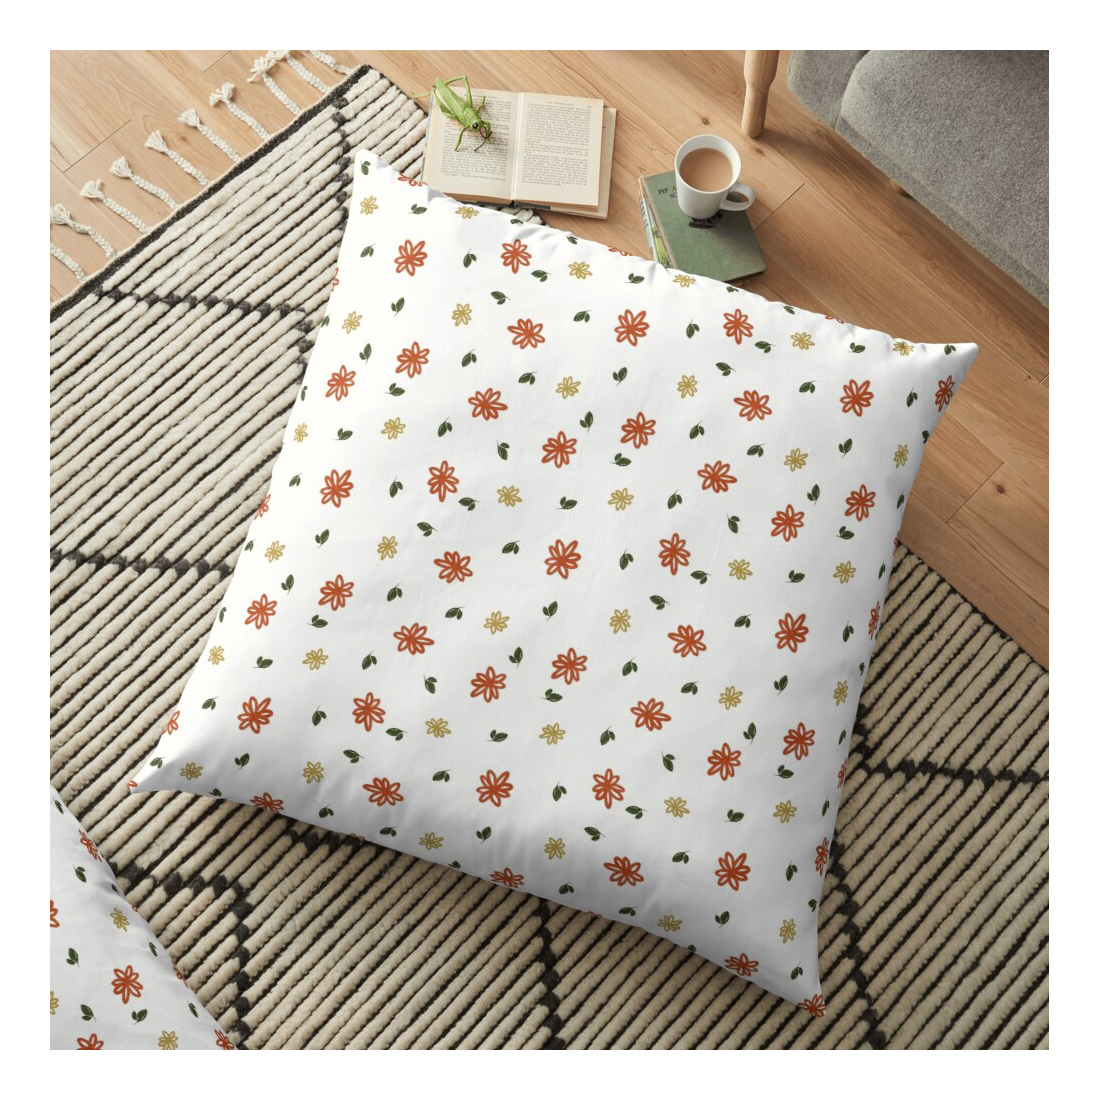 Cute Cow Patterns & Illustrations on pillow.